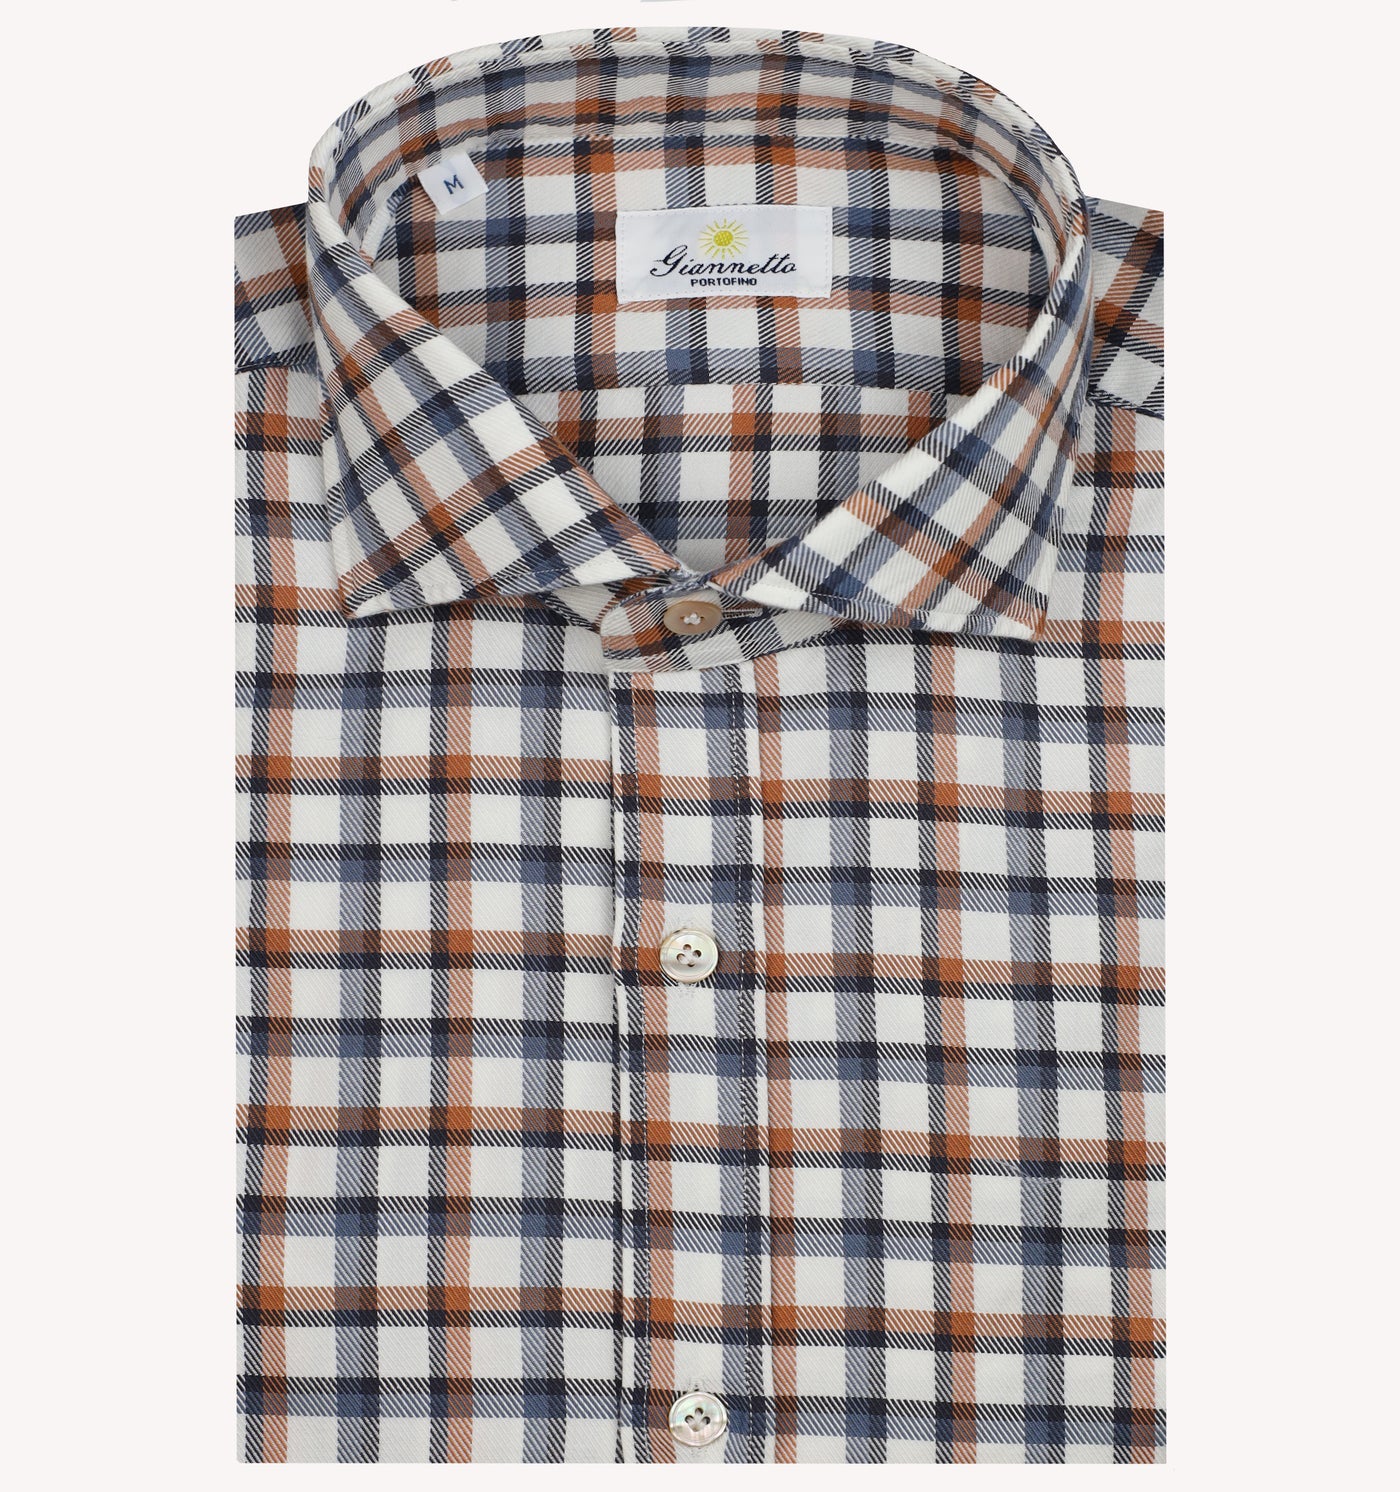 Giannetto Check Sport Shirt in Navy Camel